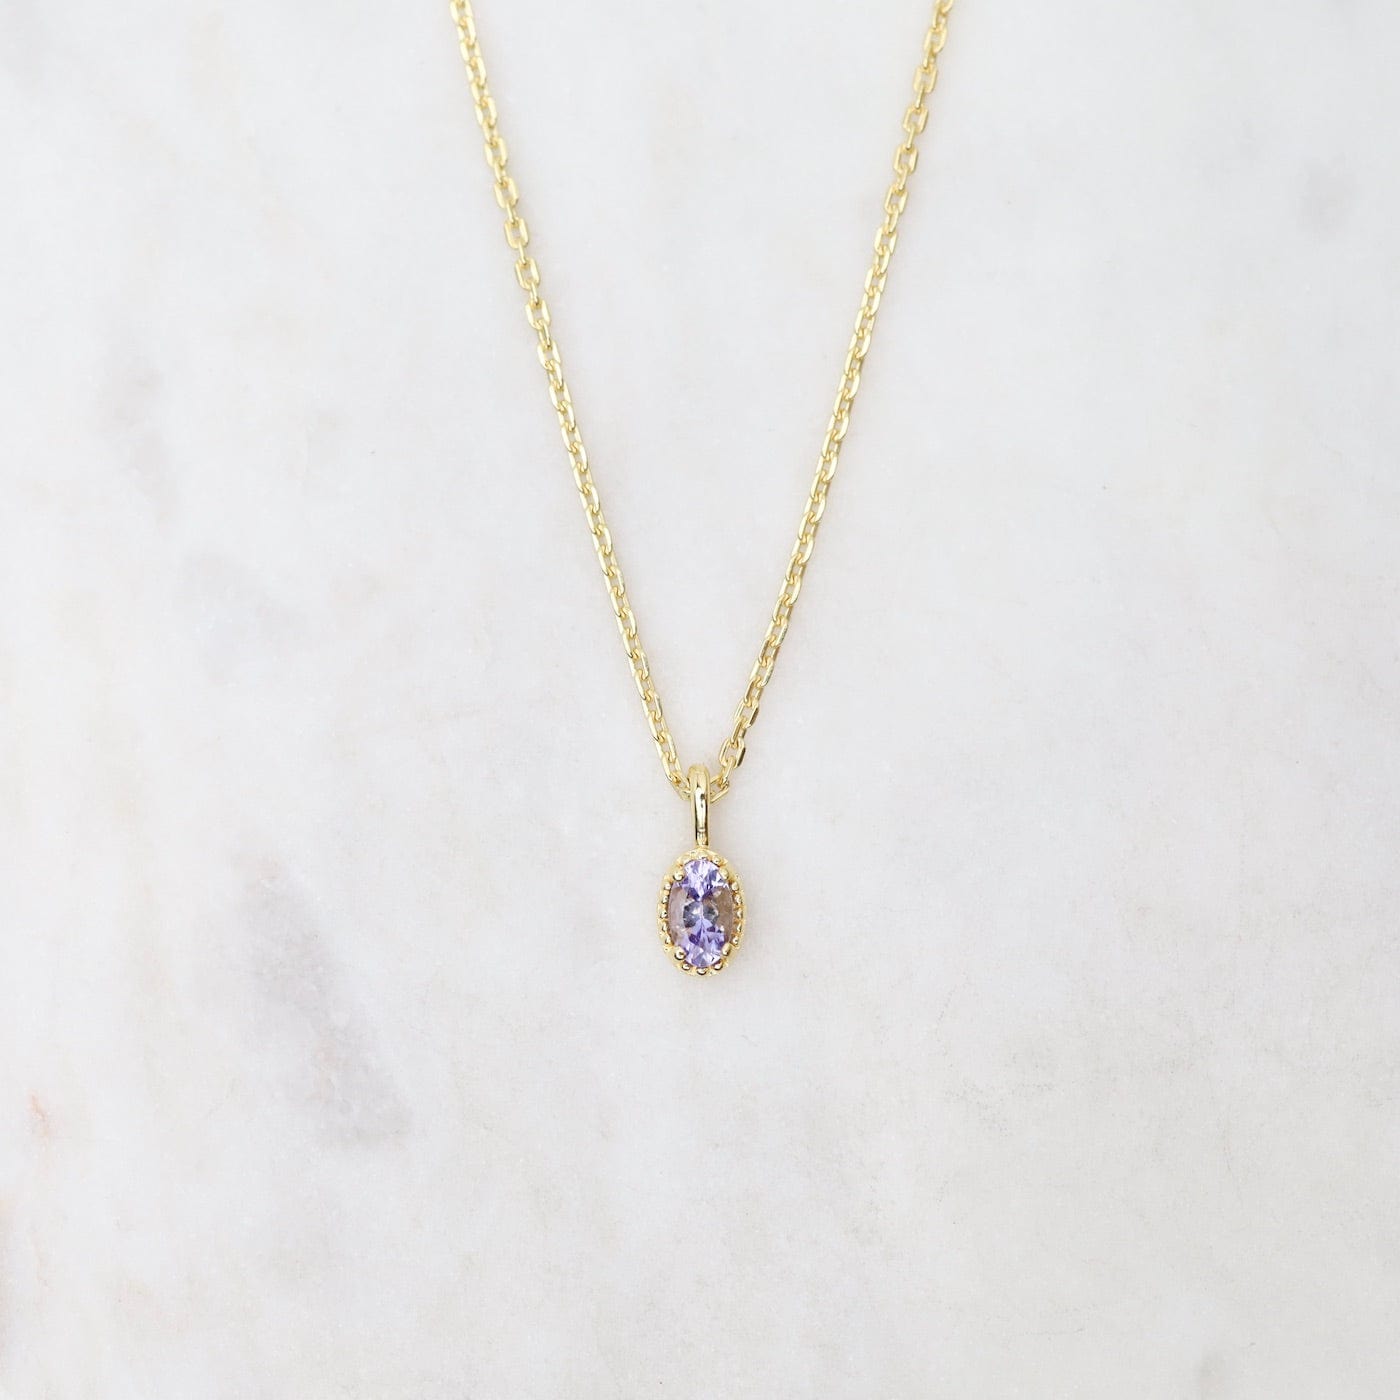 NKL-VRM Oval Tanzanite with Milgrain Edge Necklace - Gold Vermeil